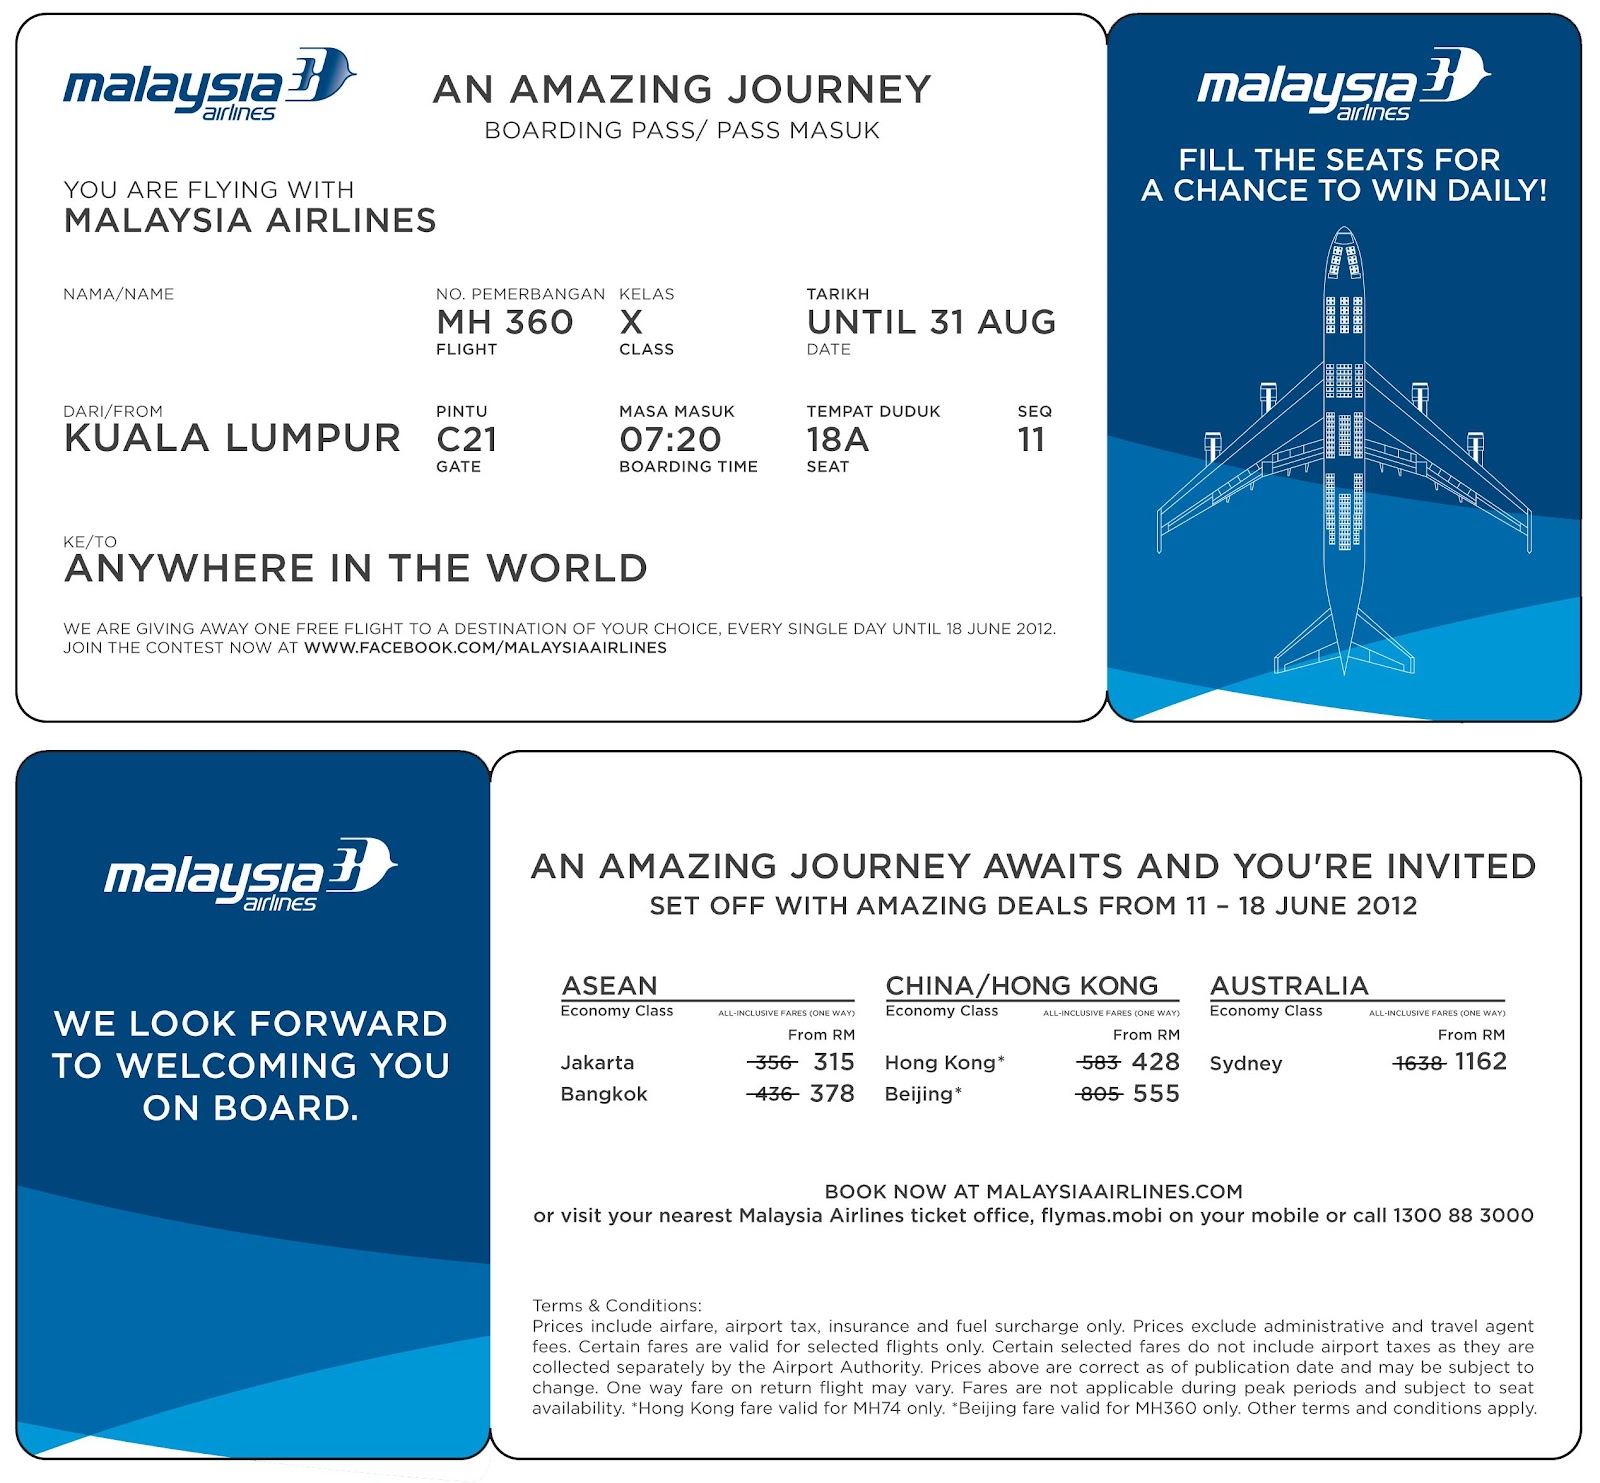 Travel & Living Journal of DT: Amazing Journeys with MAS!